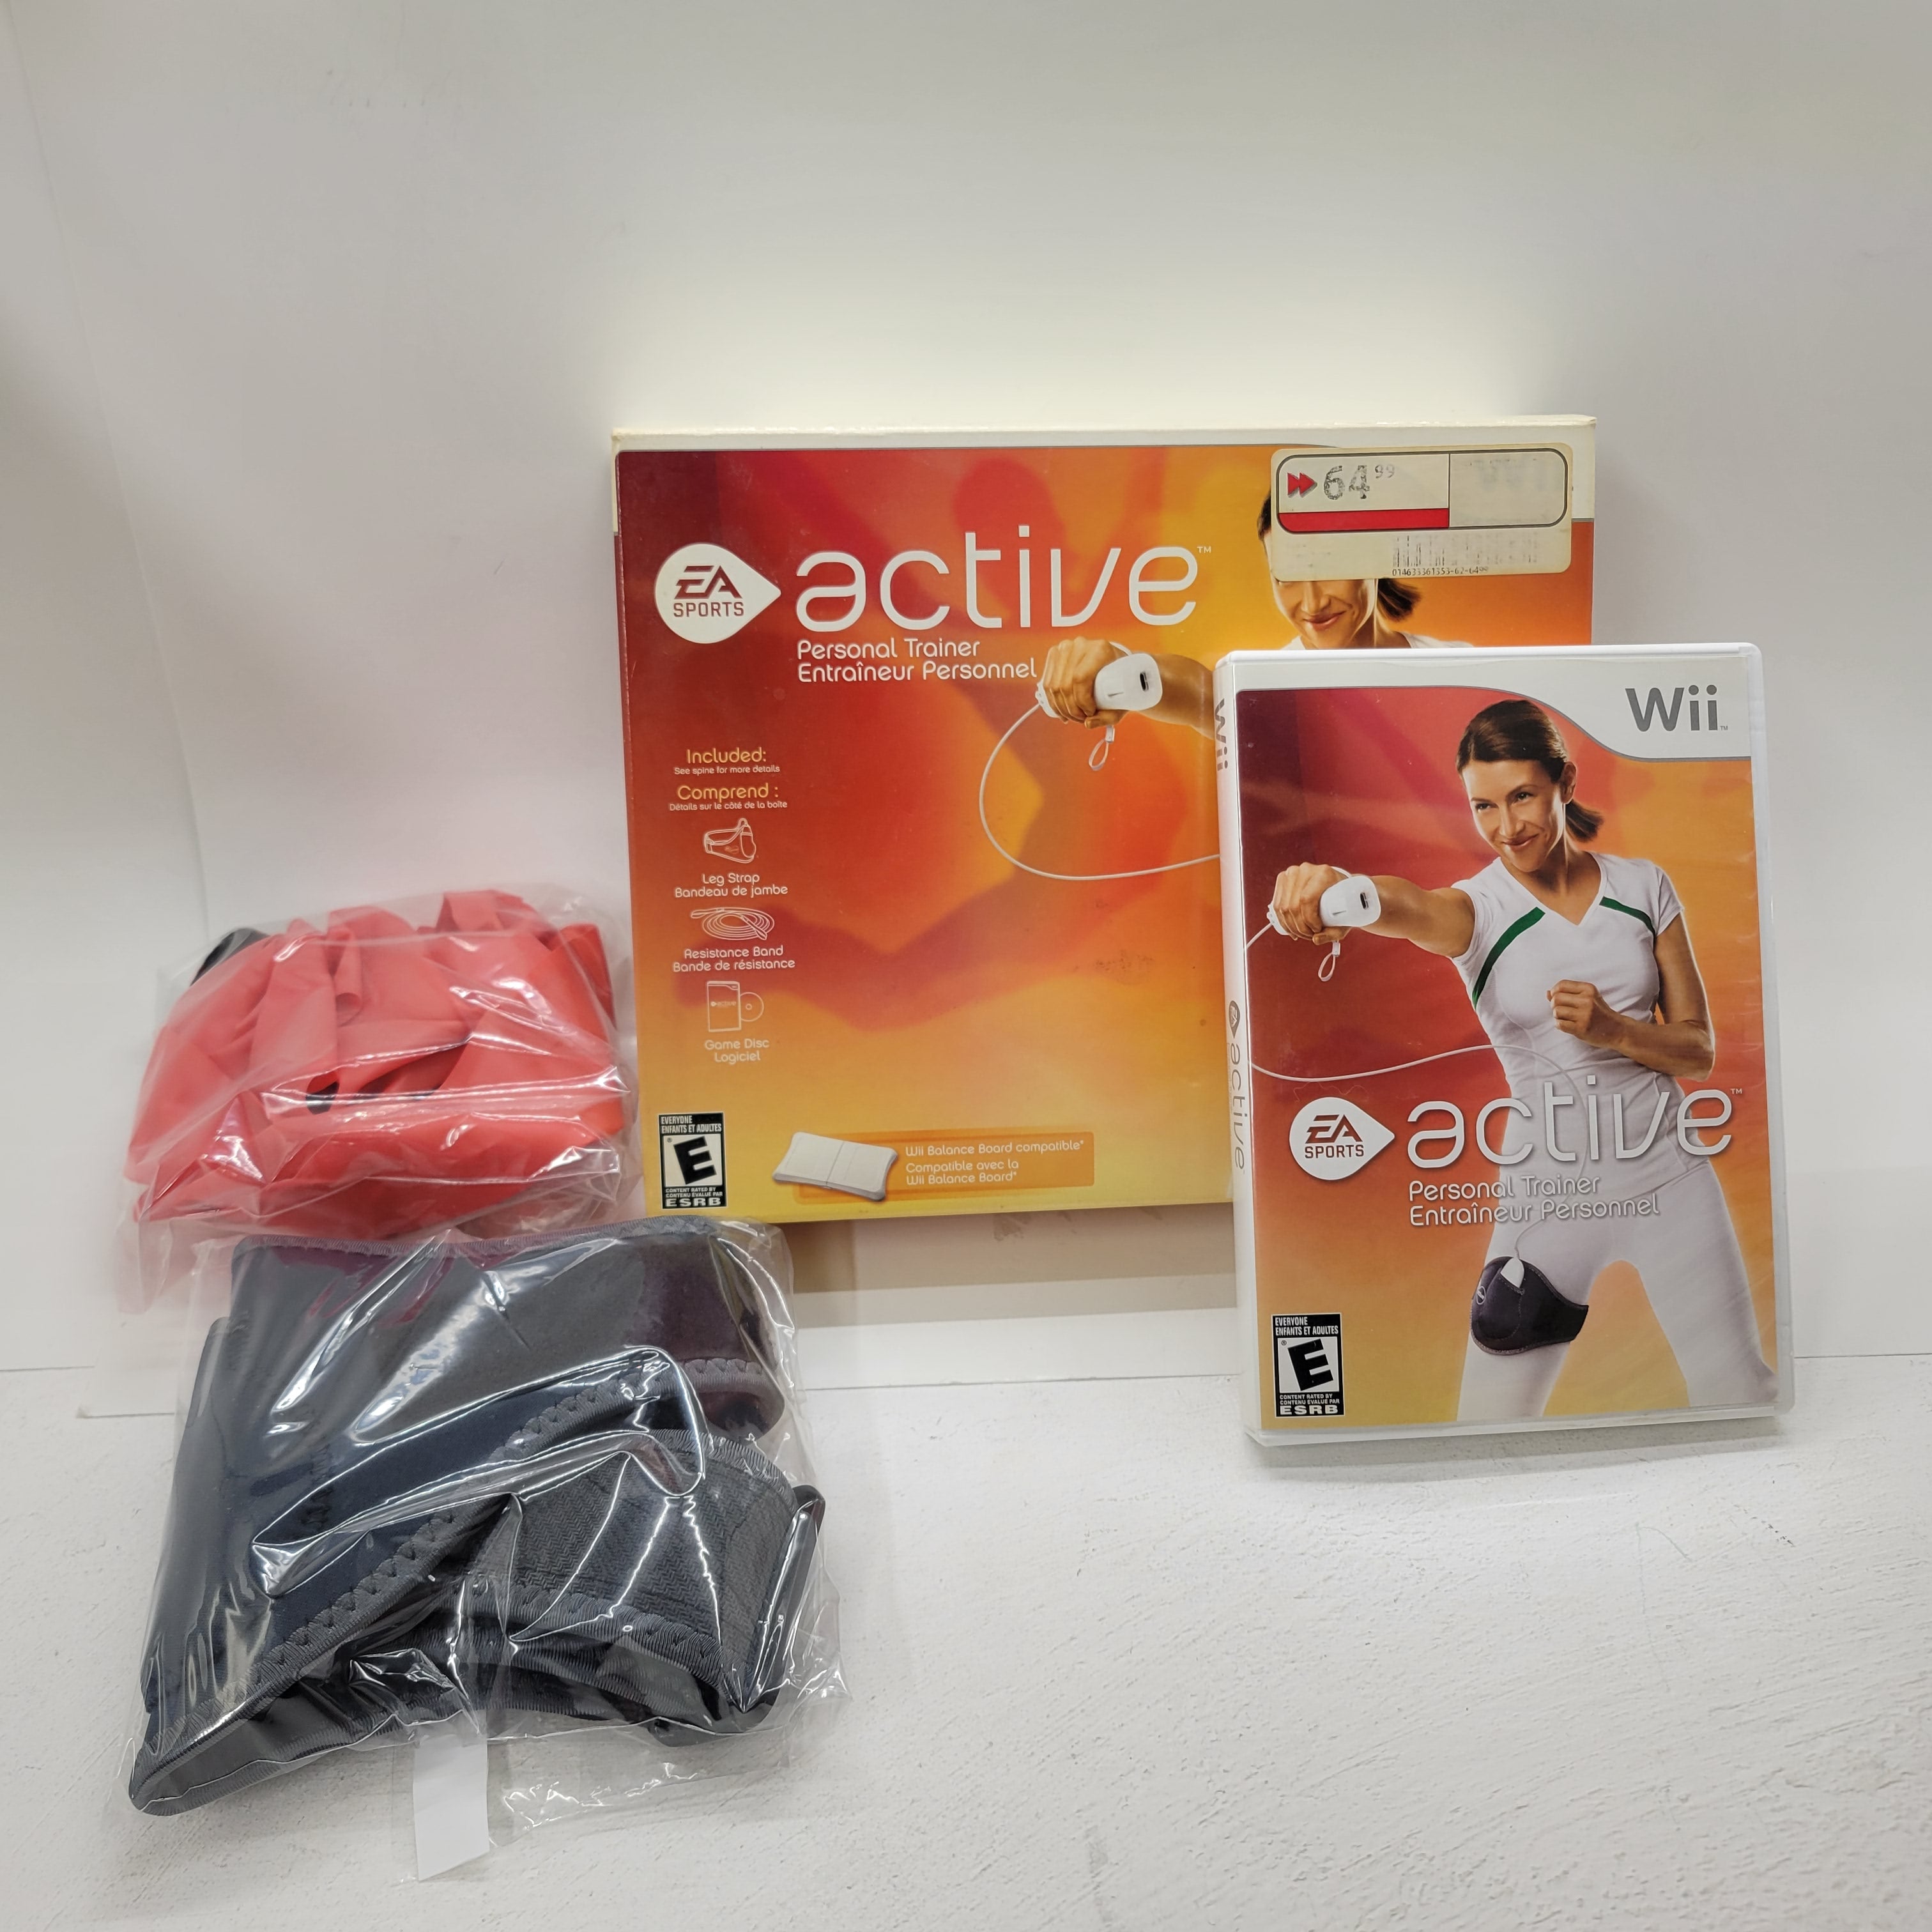 EA Sports Active - Wii at GT Games - Buy and Sell the Best Deals